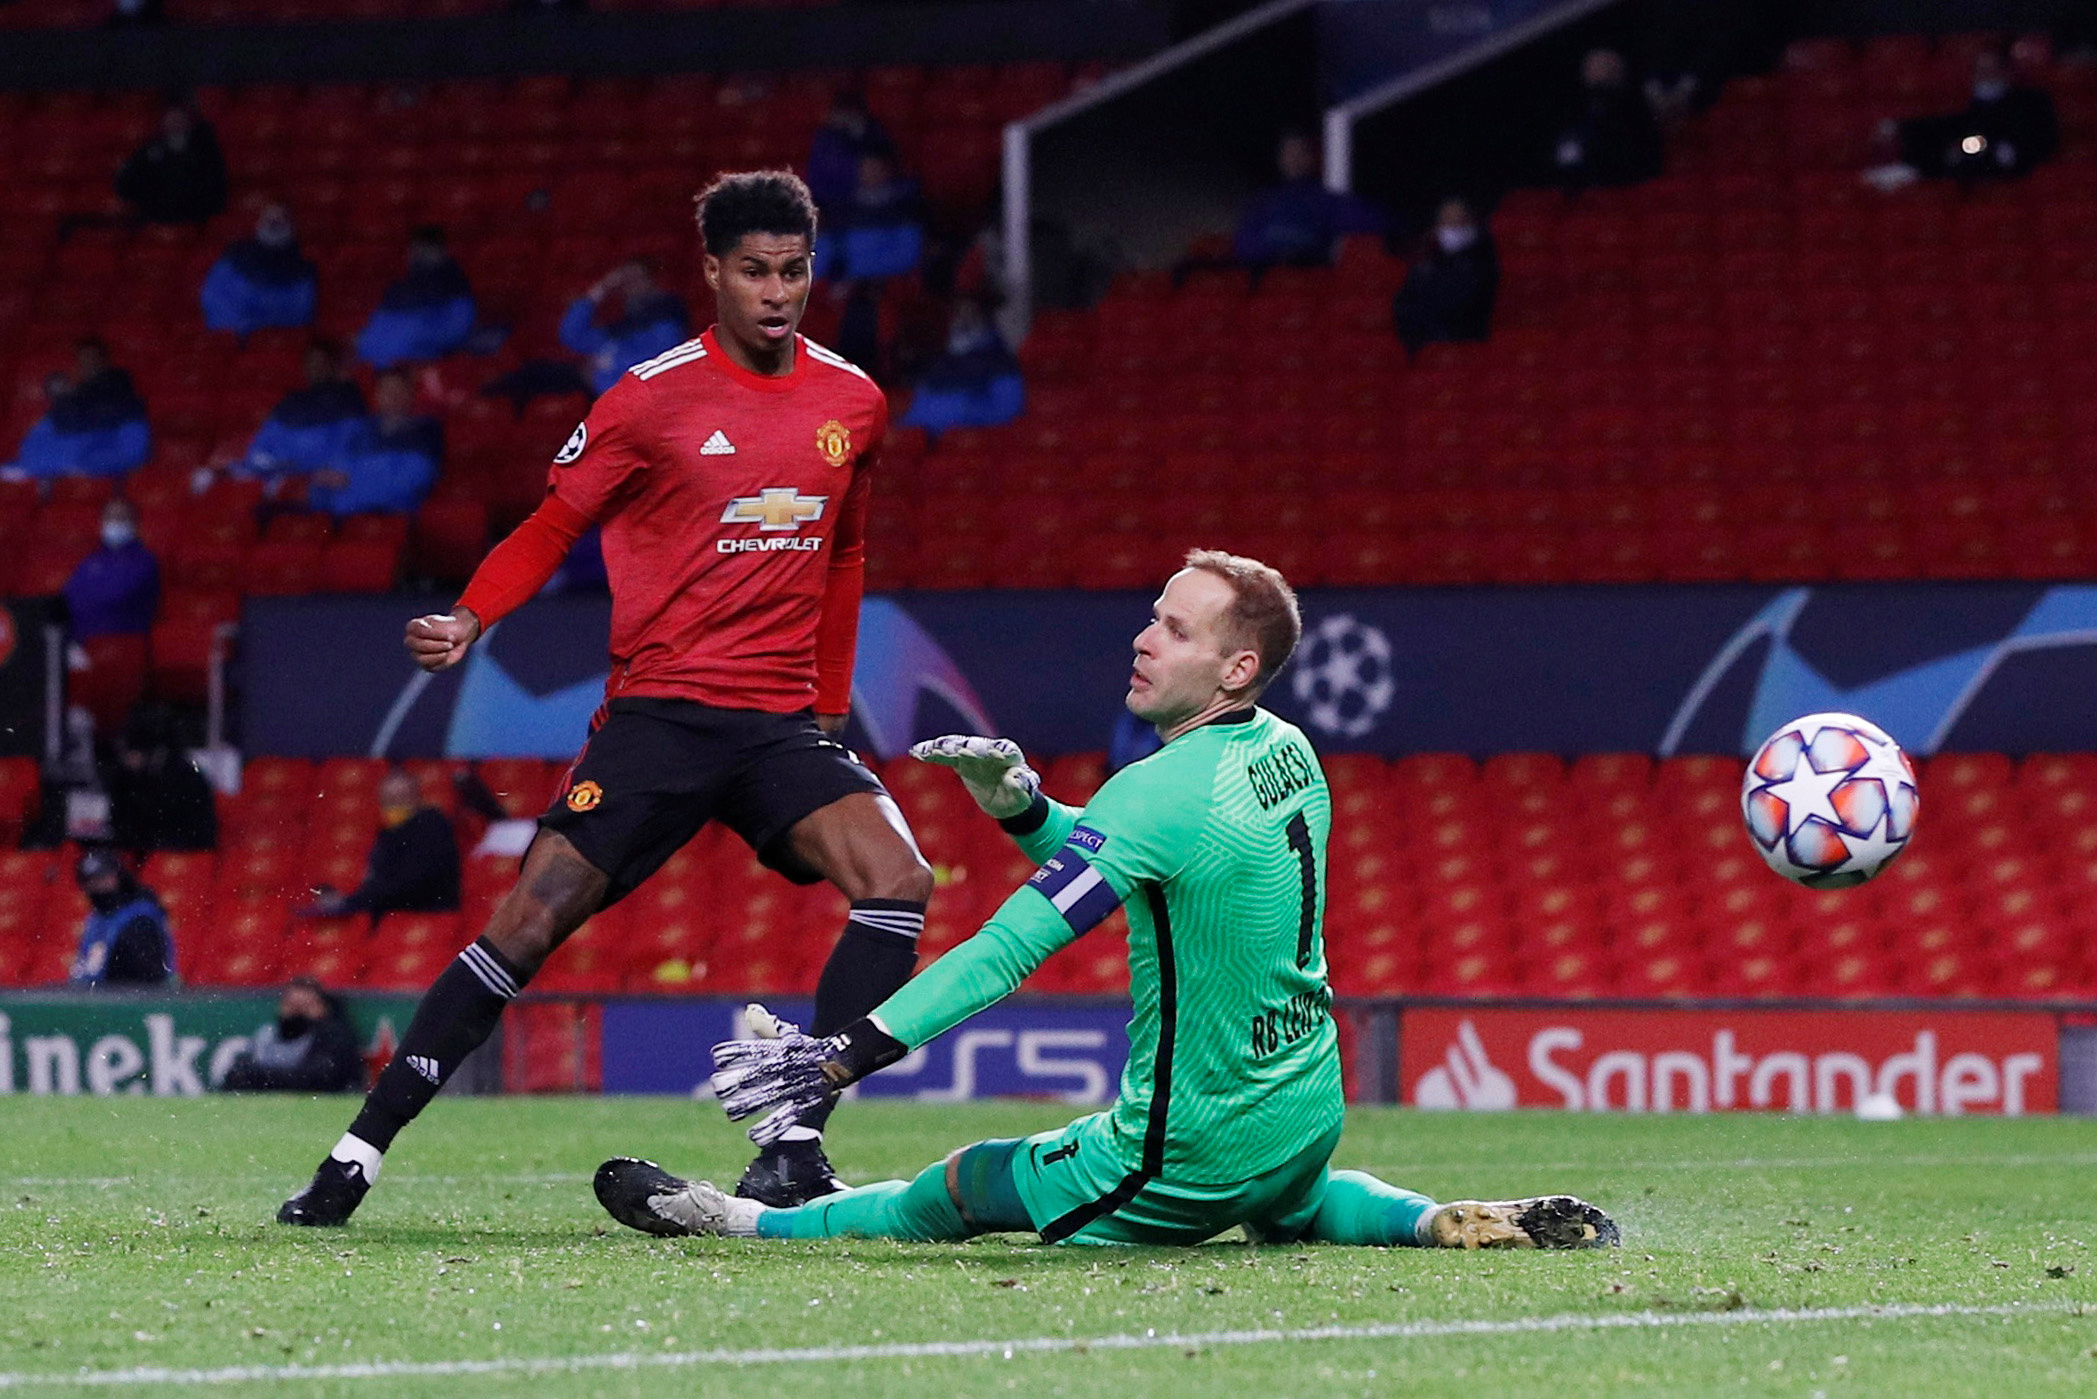 Manchester United's Marcus Rashford scores their second goal. Photo: Reuters